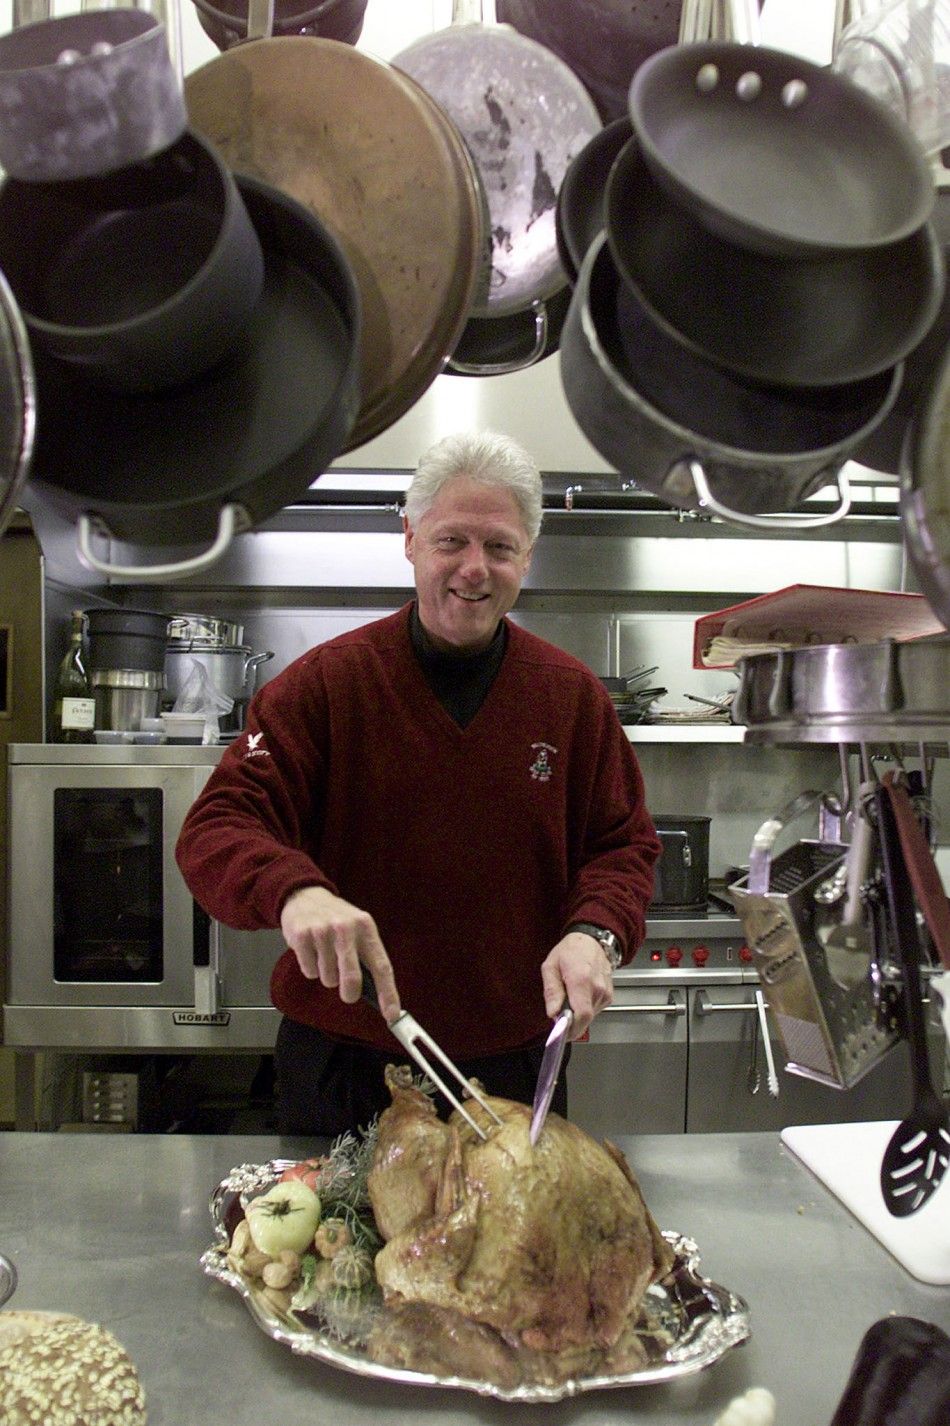 Bill Clinton and Thanksgiving